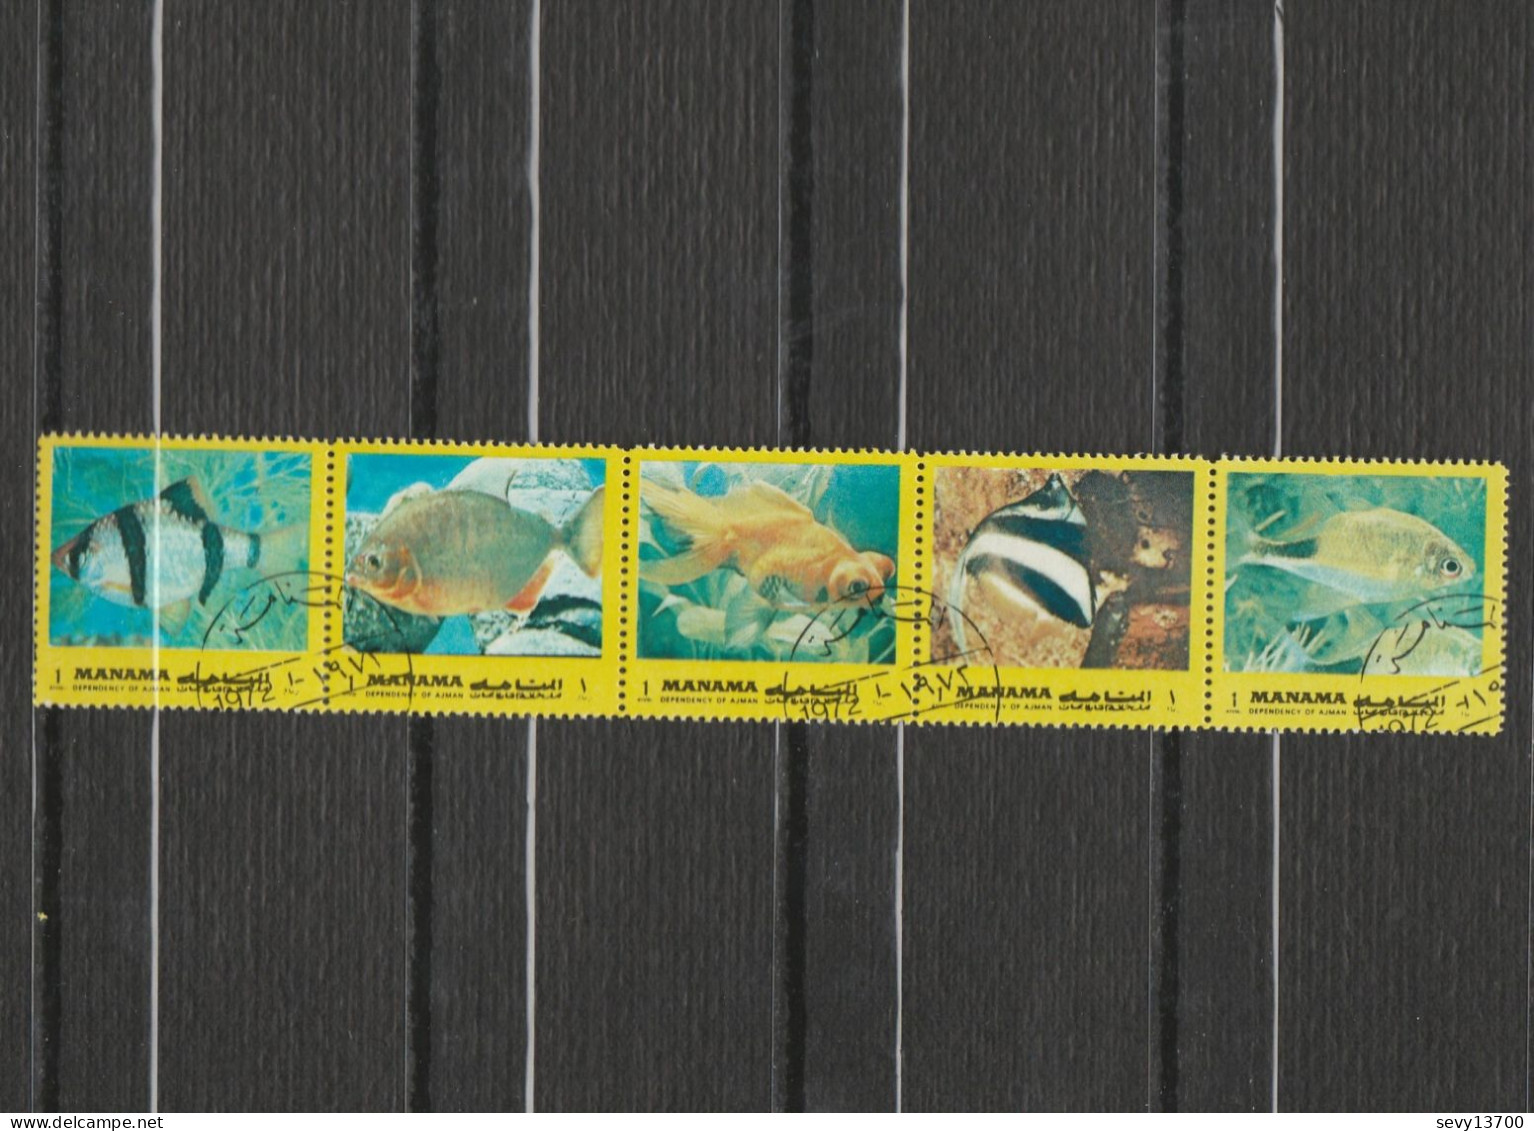 Manama - Lot 15 Timbres Année 1972  Animaux, Poissons - Manama